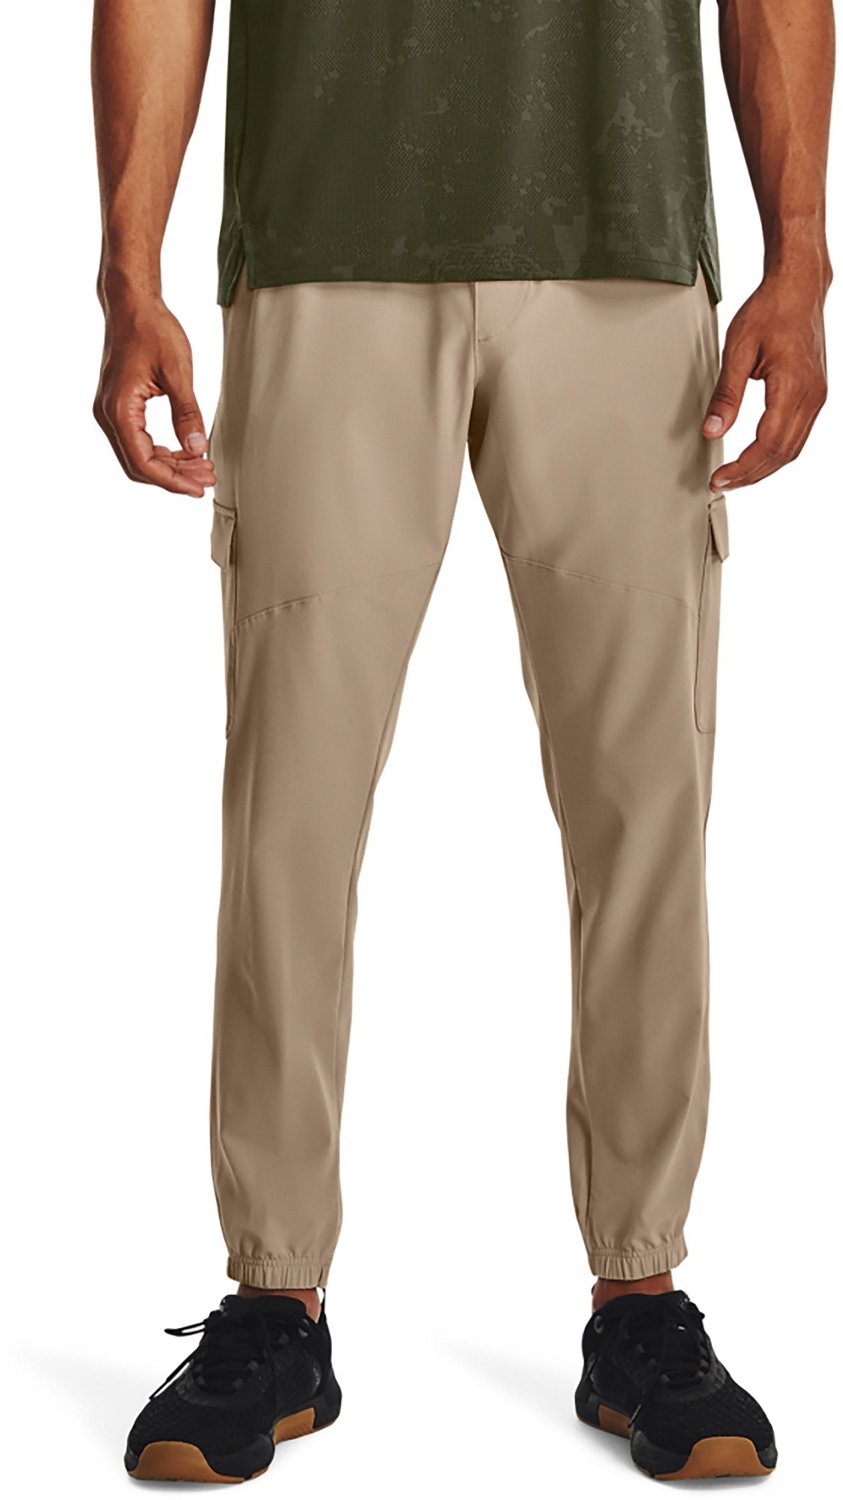 Under Armour Sweatpants for sale in Dickshooter, Idaho